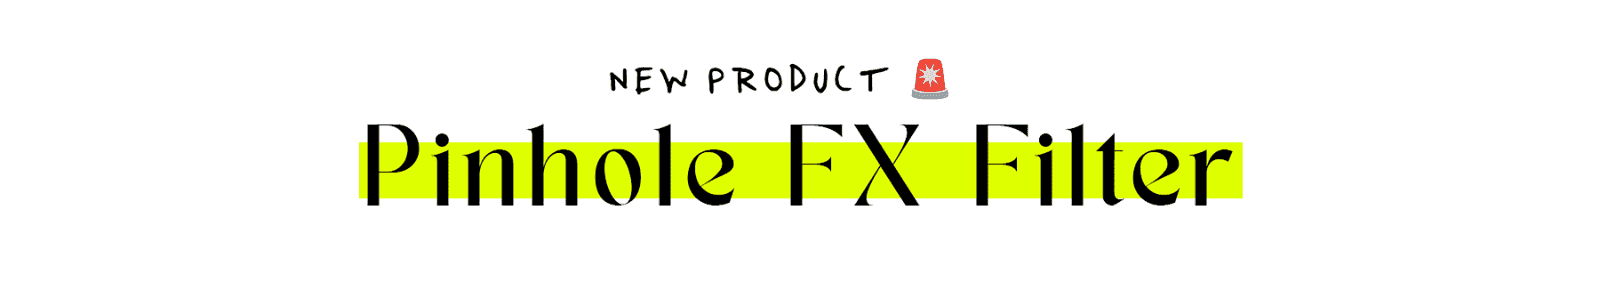 New Product - Pinhole FX Filter